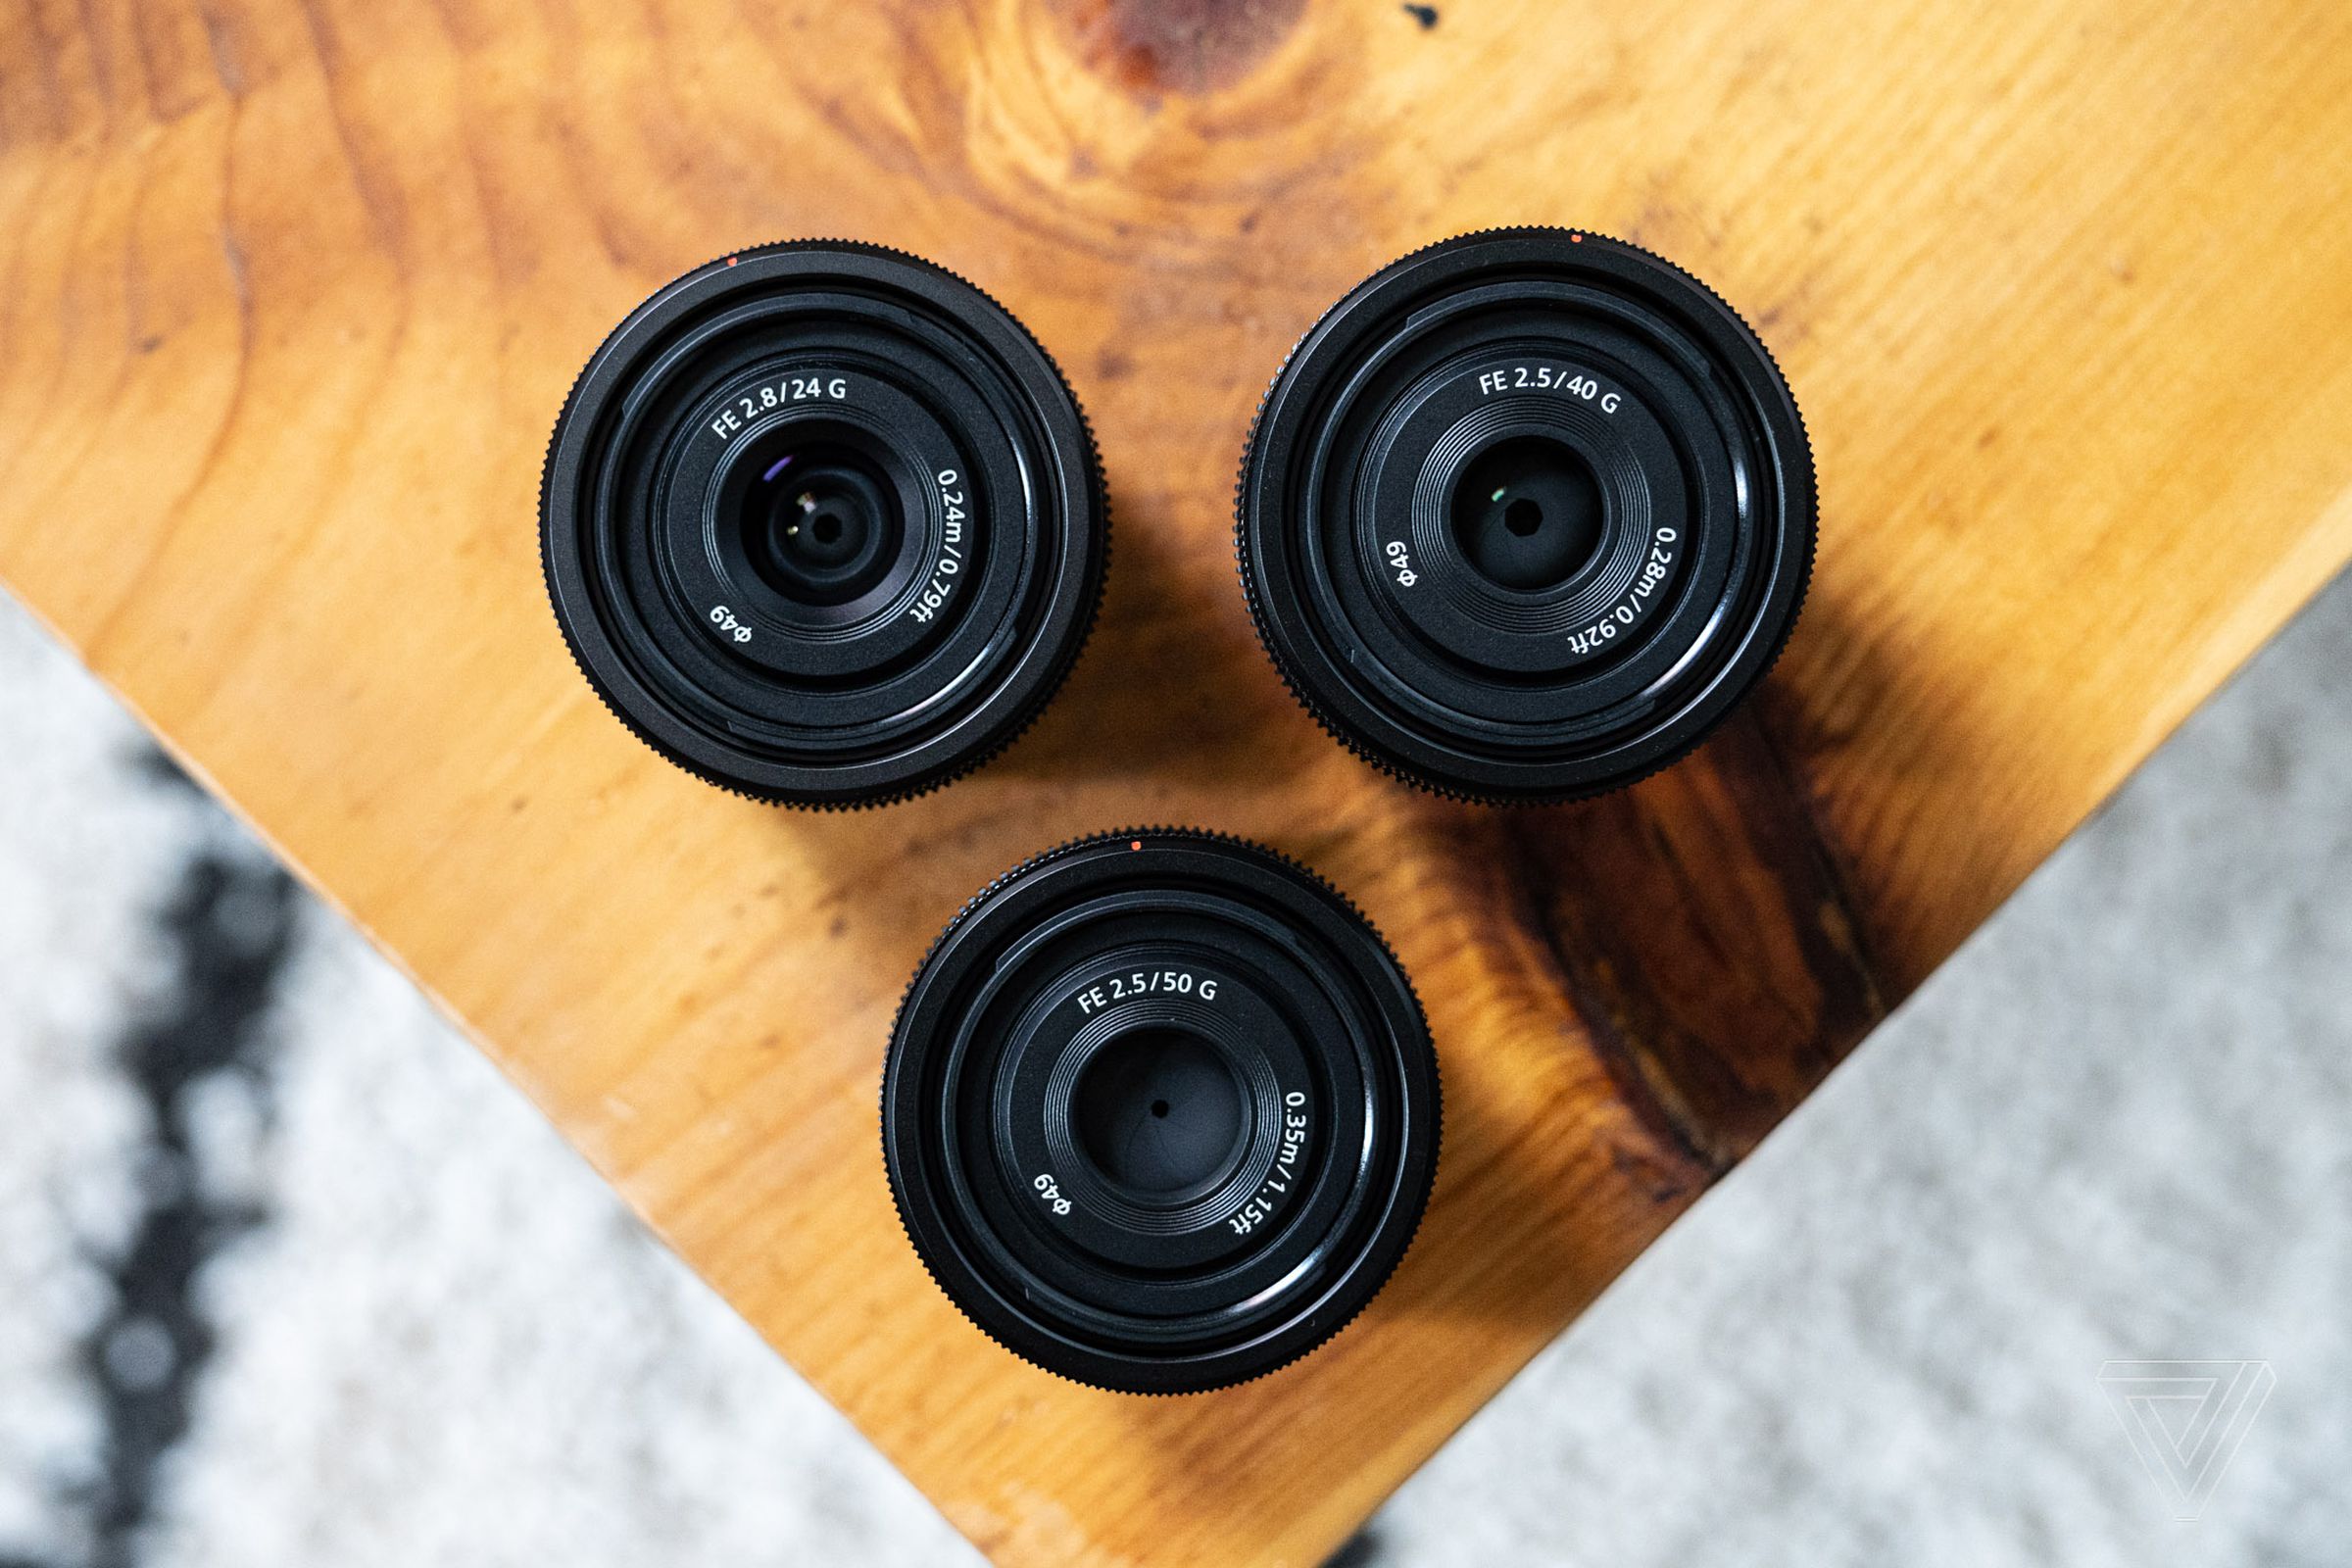 When taking this photo, my Sony A7C’s autofocus system recognized these lenses as a face.